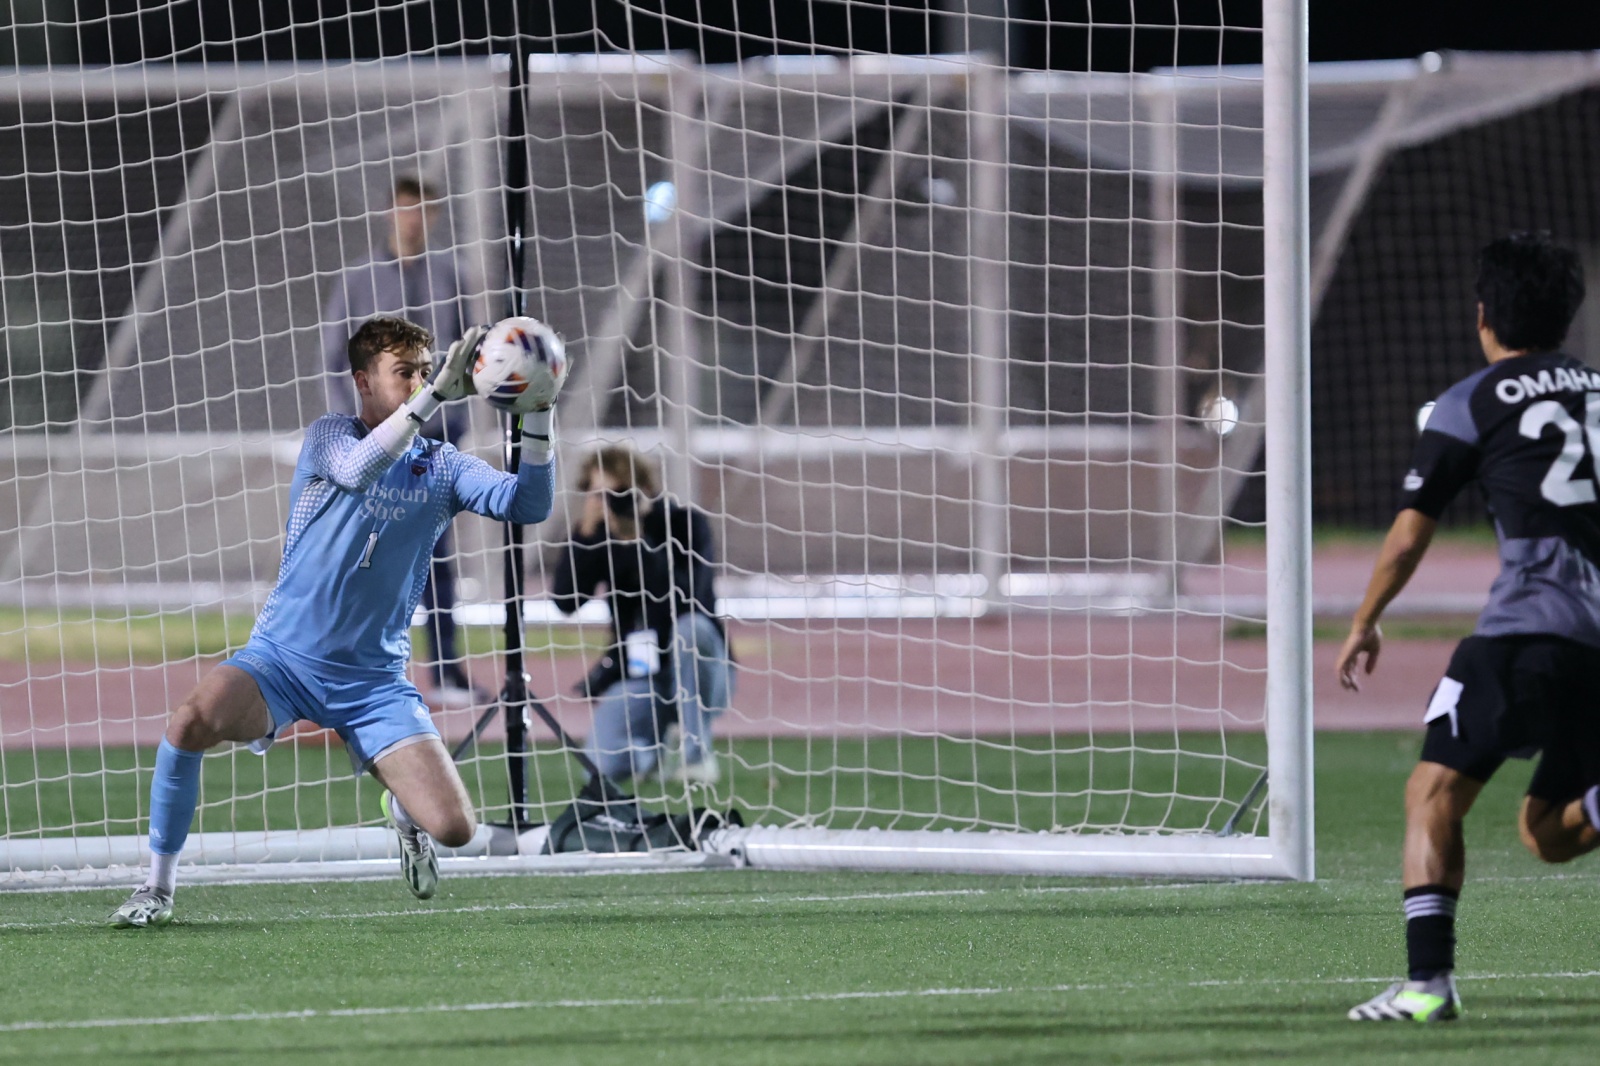 Missouri State Bears soccer goalie Harry Townsend makes a save during a game